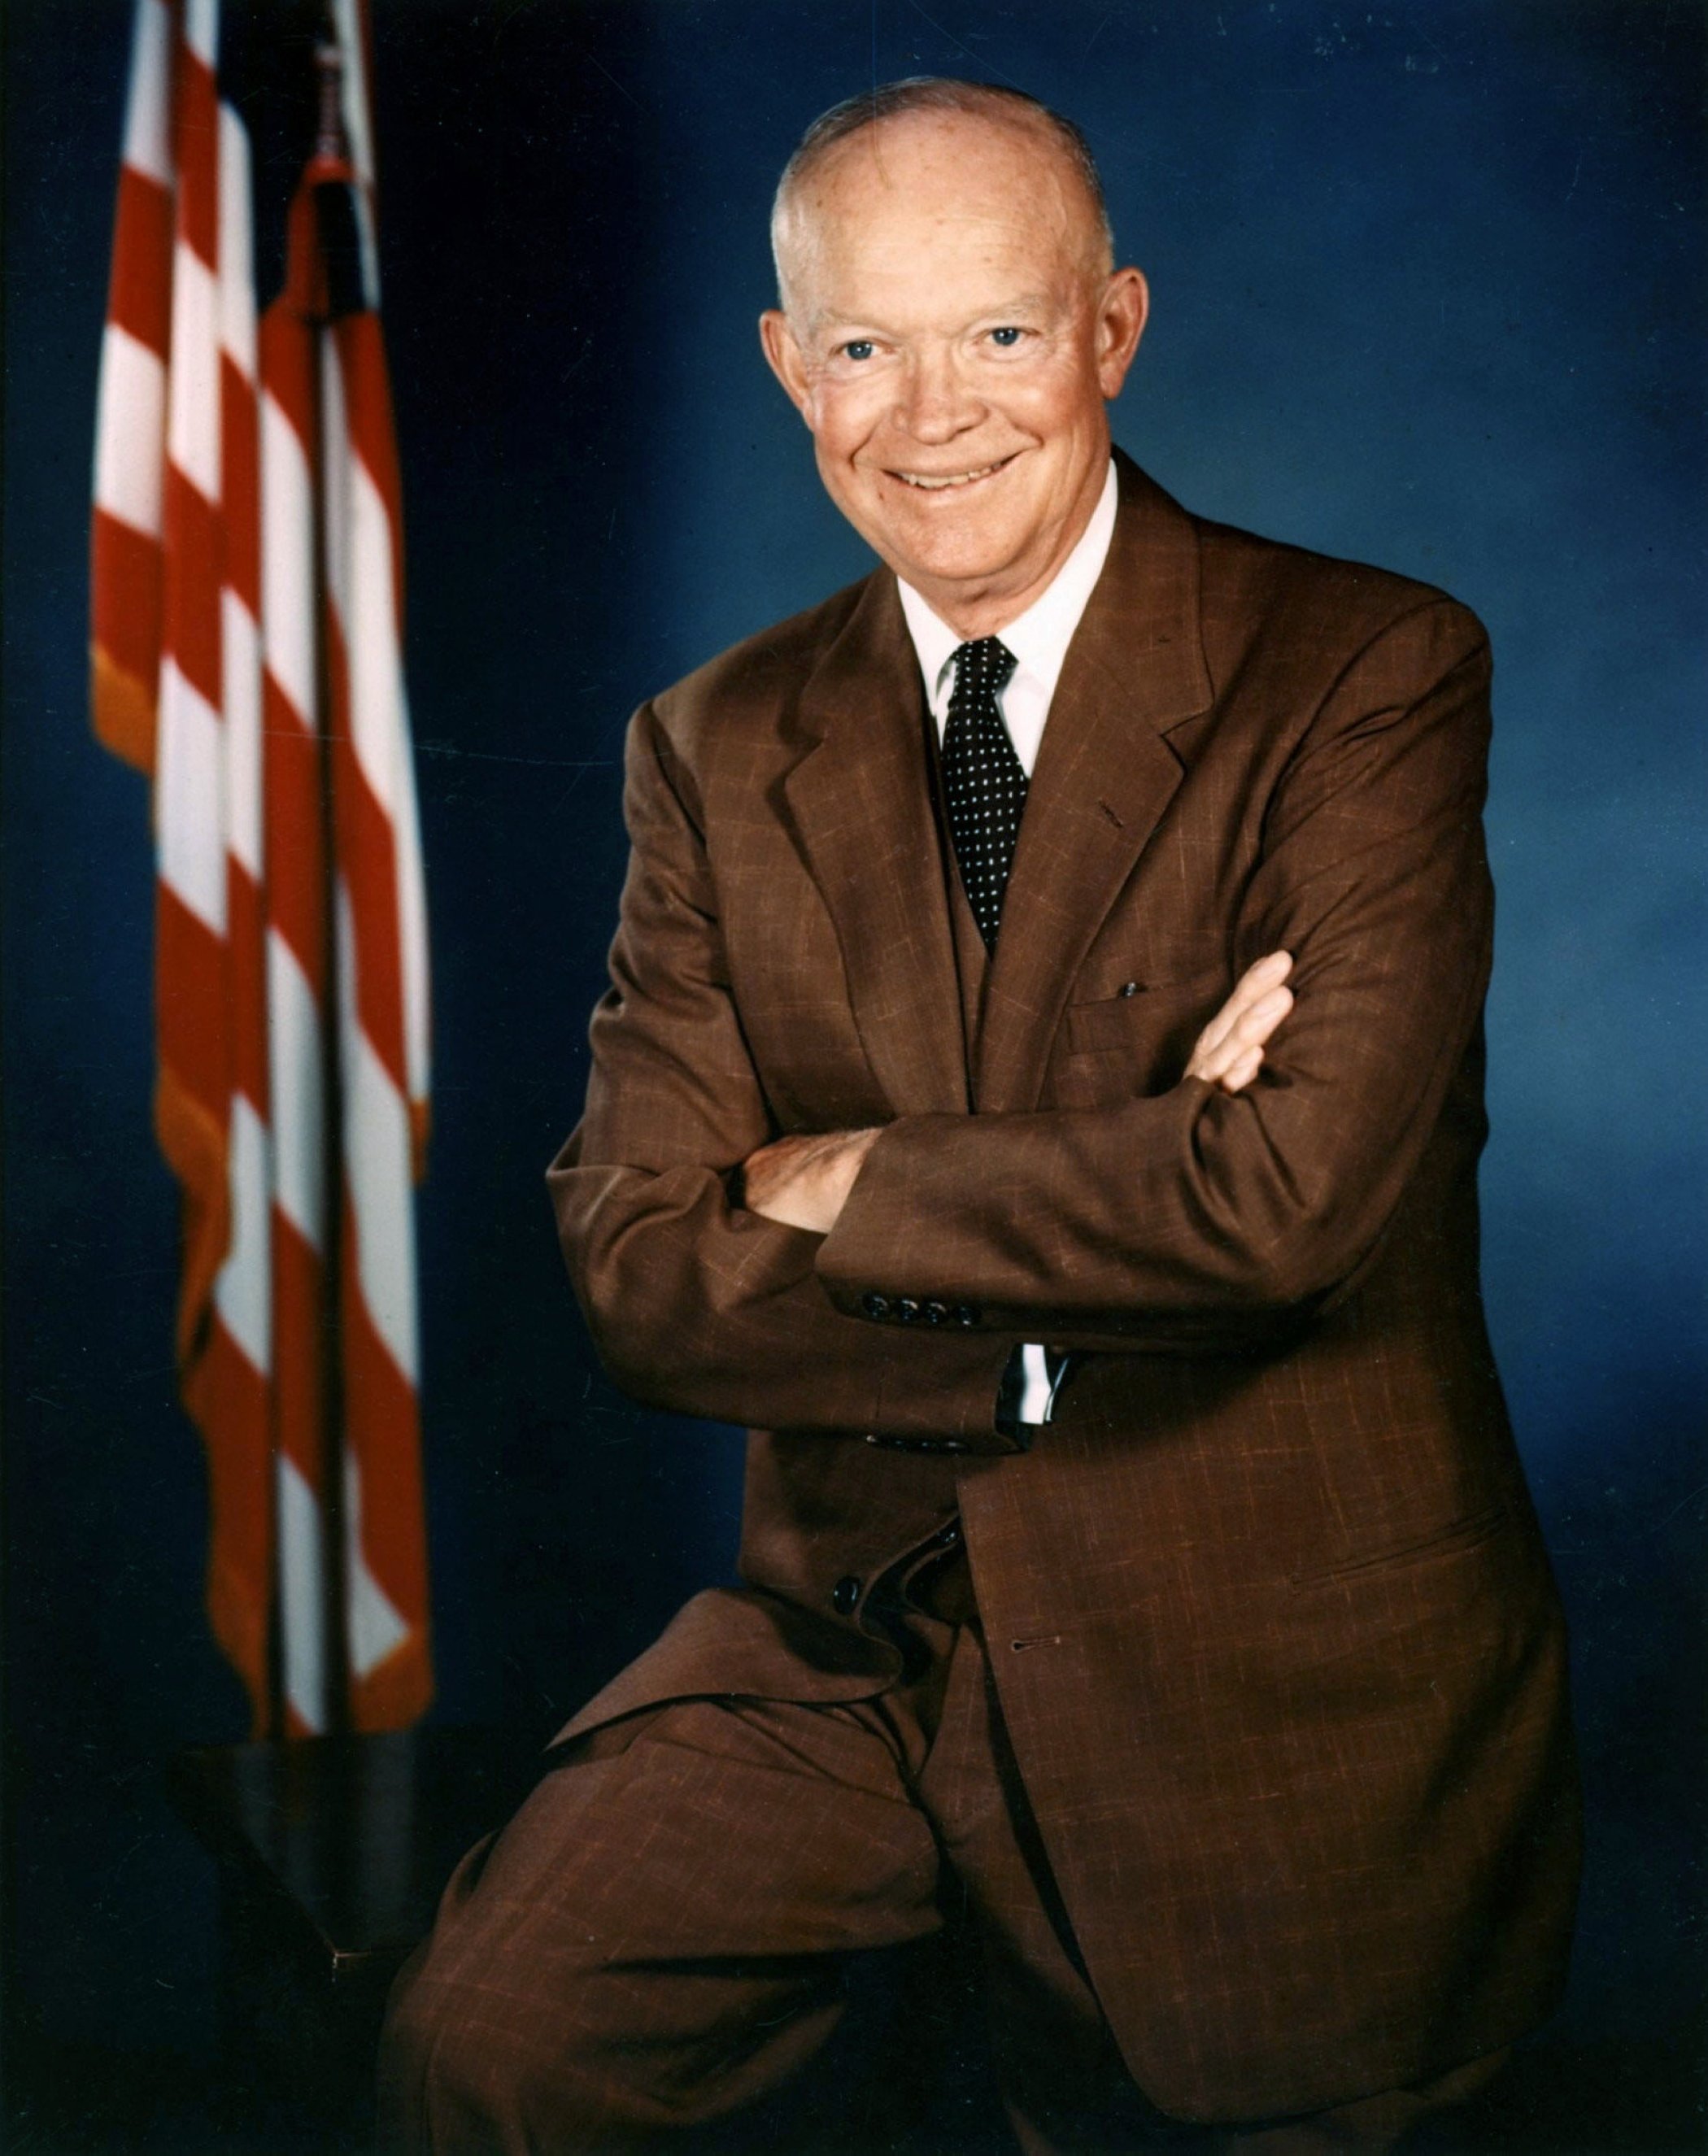 American military officer and statesman Dwight Eisenhower who served as the 34th President of the United States from 1953 to 1961. (Sabah Archive Photo)